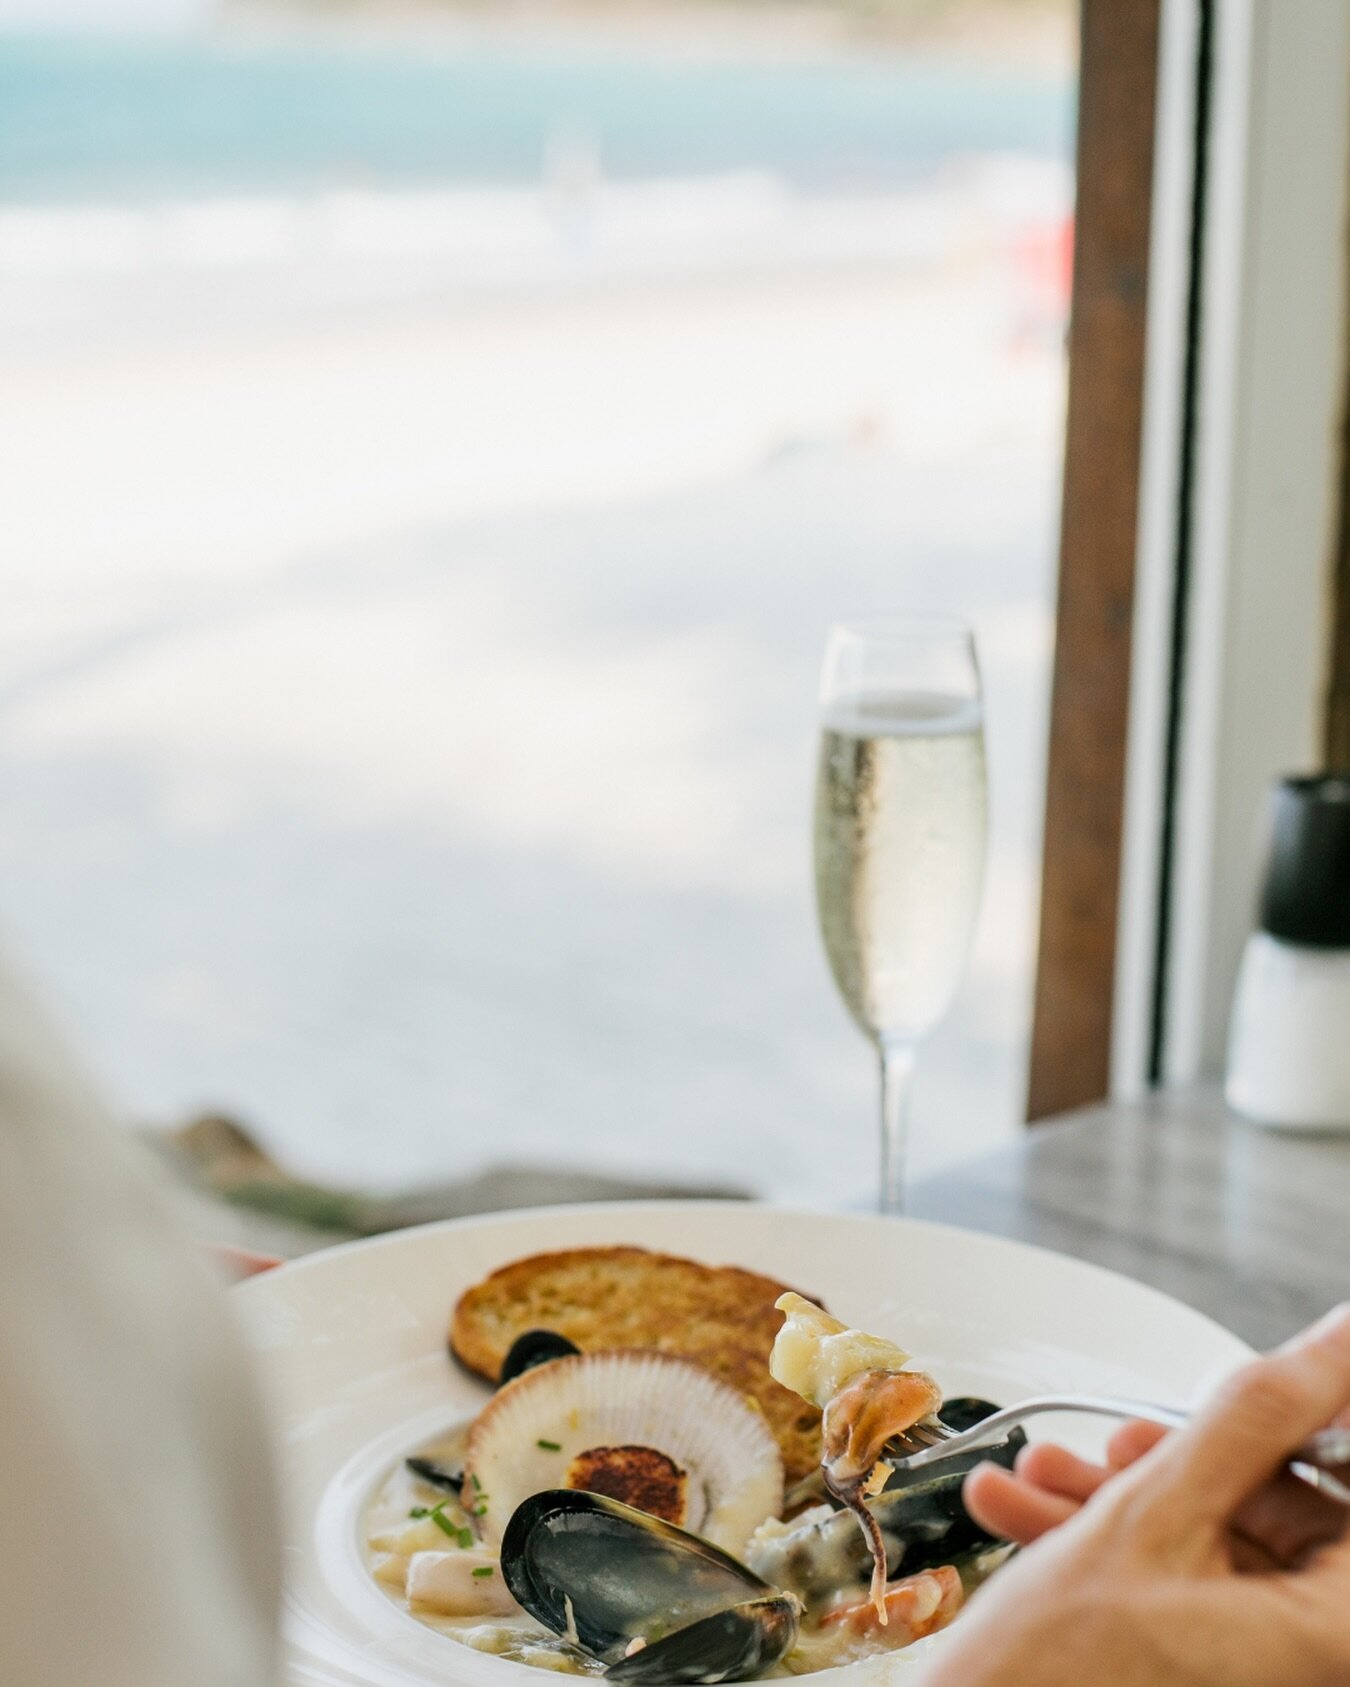 Come rain or shine, our breathtaking view of Noosa Main Beach never disappoints! Join us and enjoy some delicious food while watching the waves roll by. 

~ Open every day from 6.30am until late.
~ Bookings via link in bio.

.
.
.

#beachfrontdining 